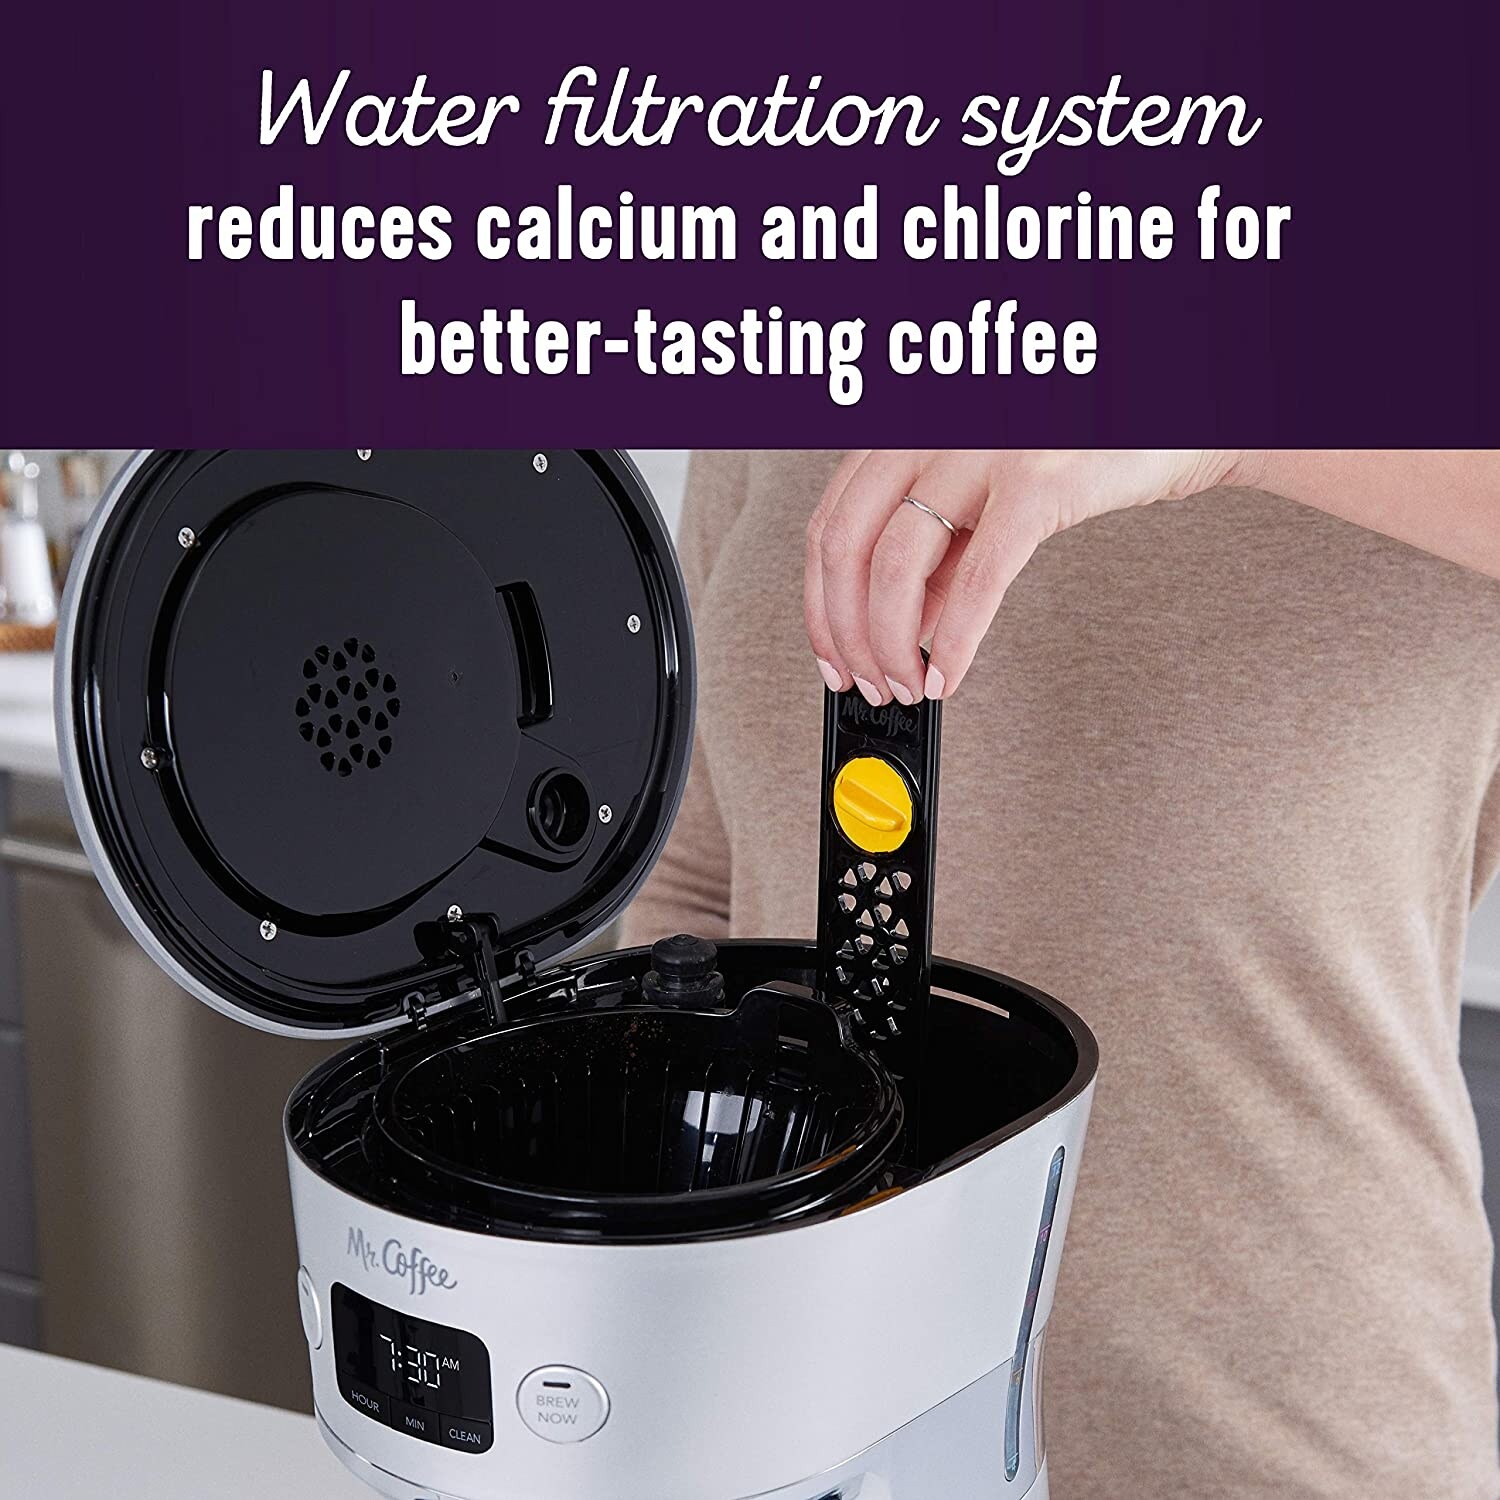 Easy Measure 12 Cup Programmable Maker with Gold Tone Reusable Filter - Bed  Bath & Beyond - 37527257